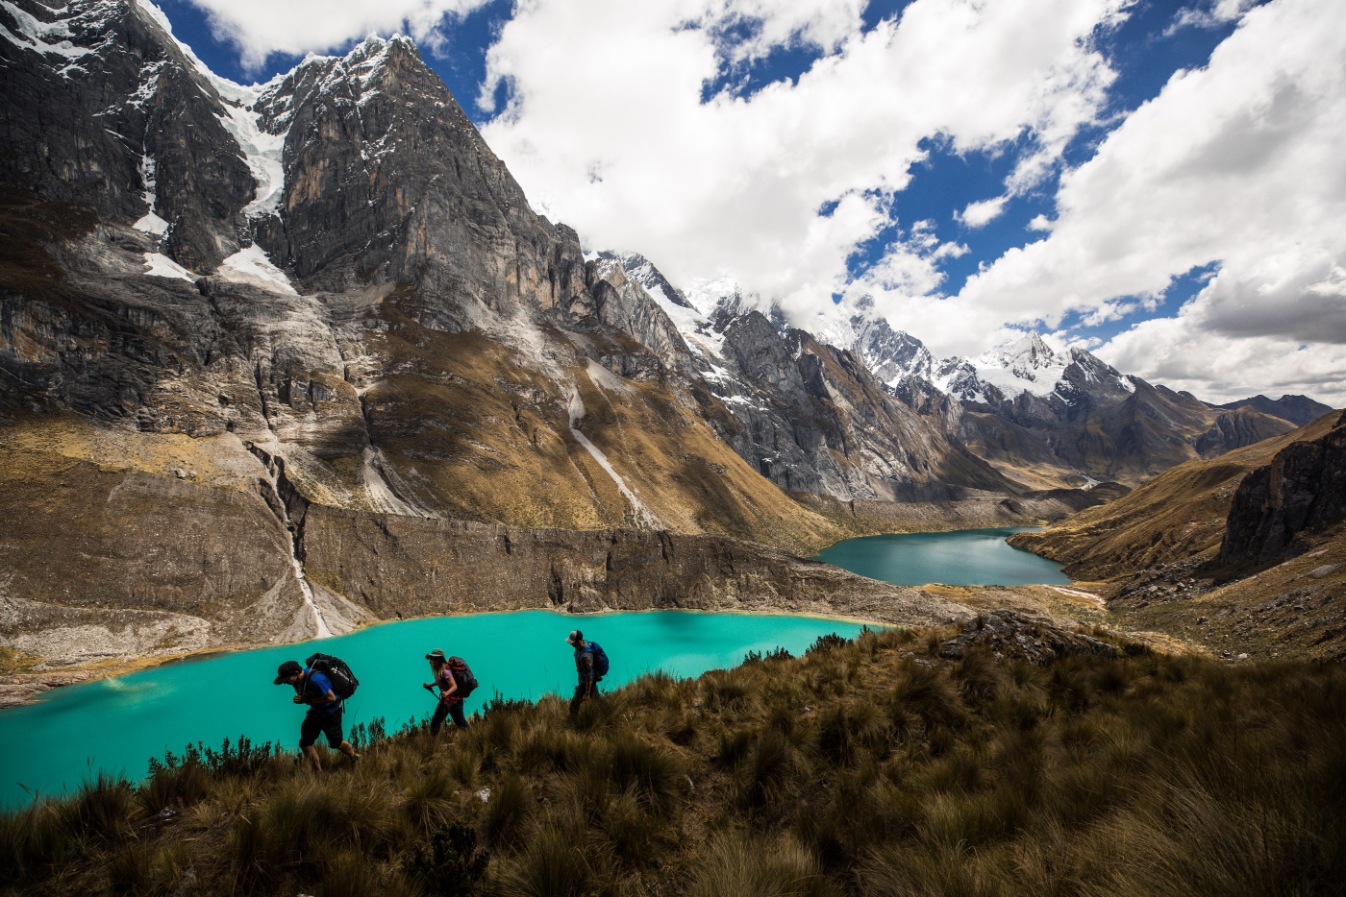 Three hikers on the Cordillera Huayhuash Trek in front of a green lake.